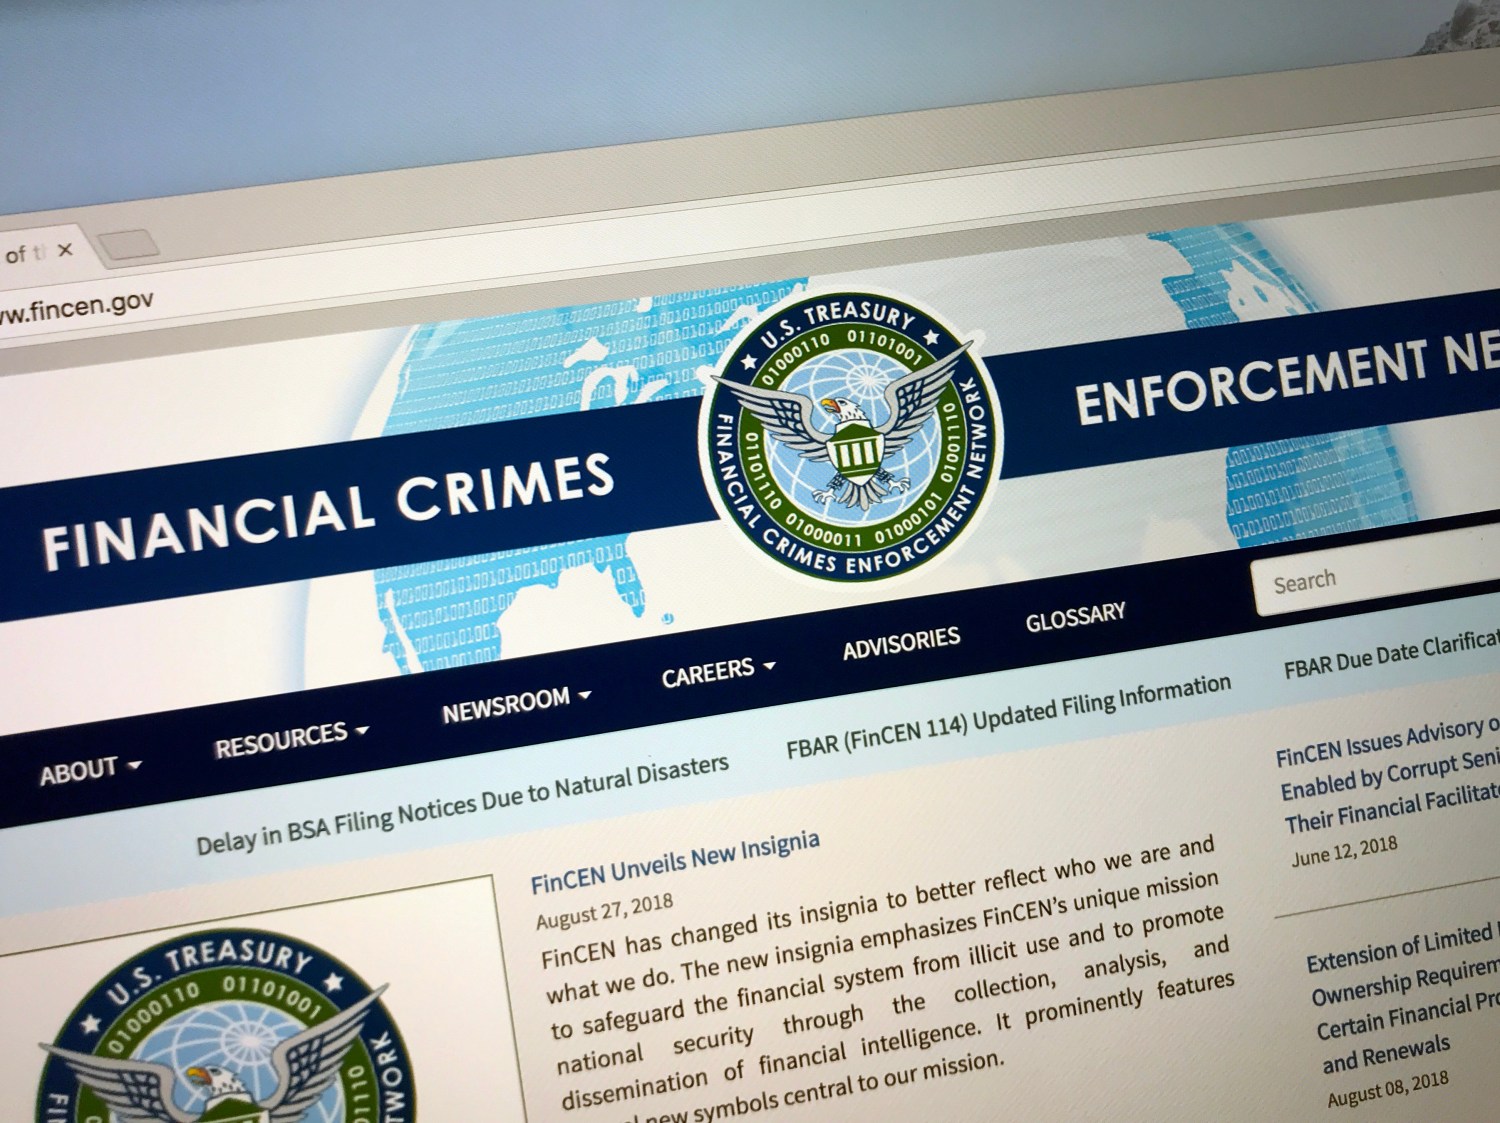 Website of The Financial Crimes Enforcement Network or FinCEN, a bureau of the U.S. Department of the Treasury.